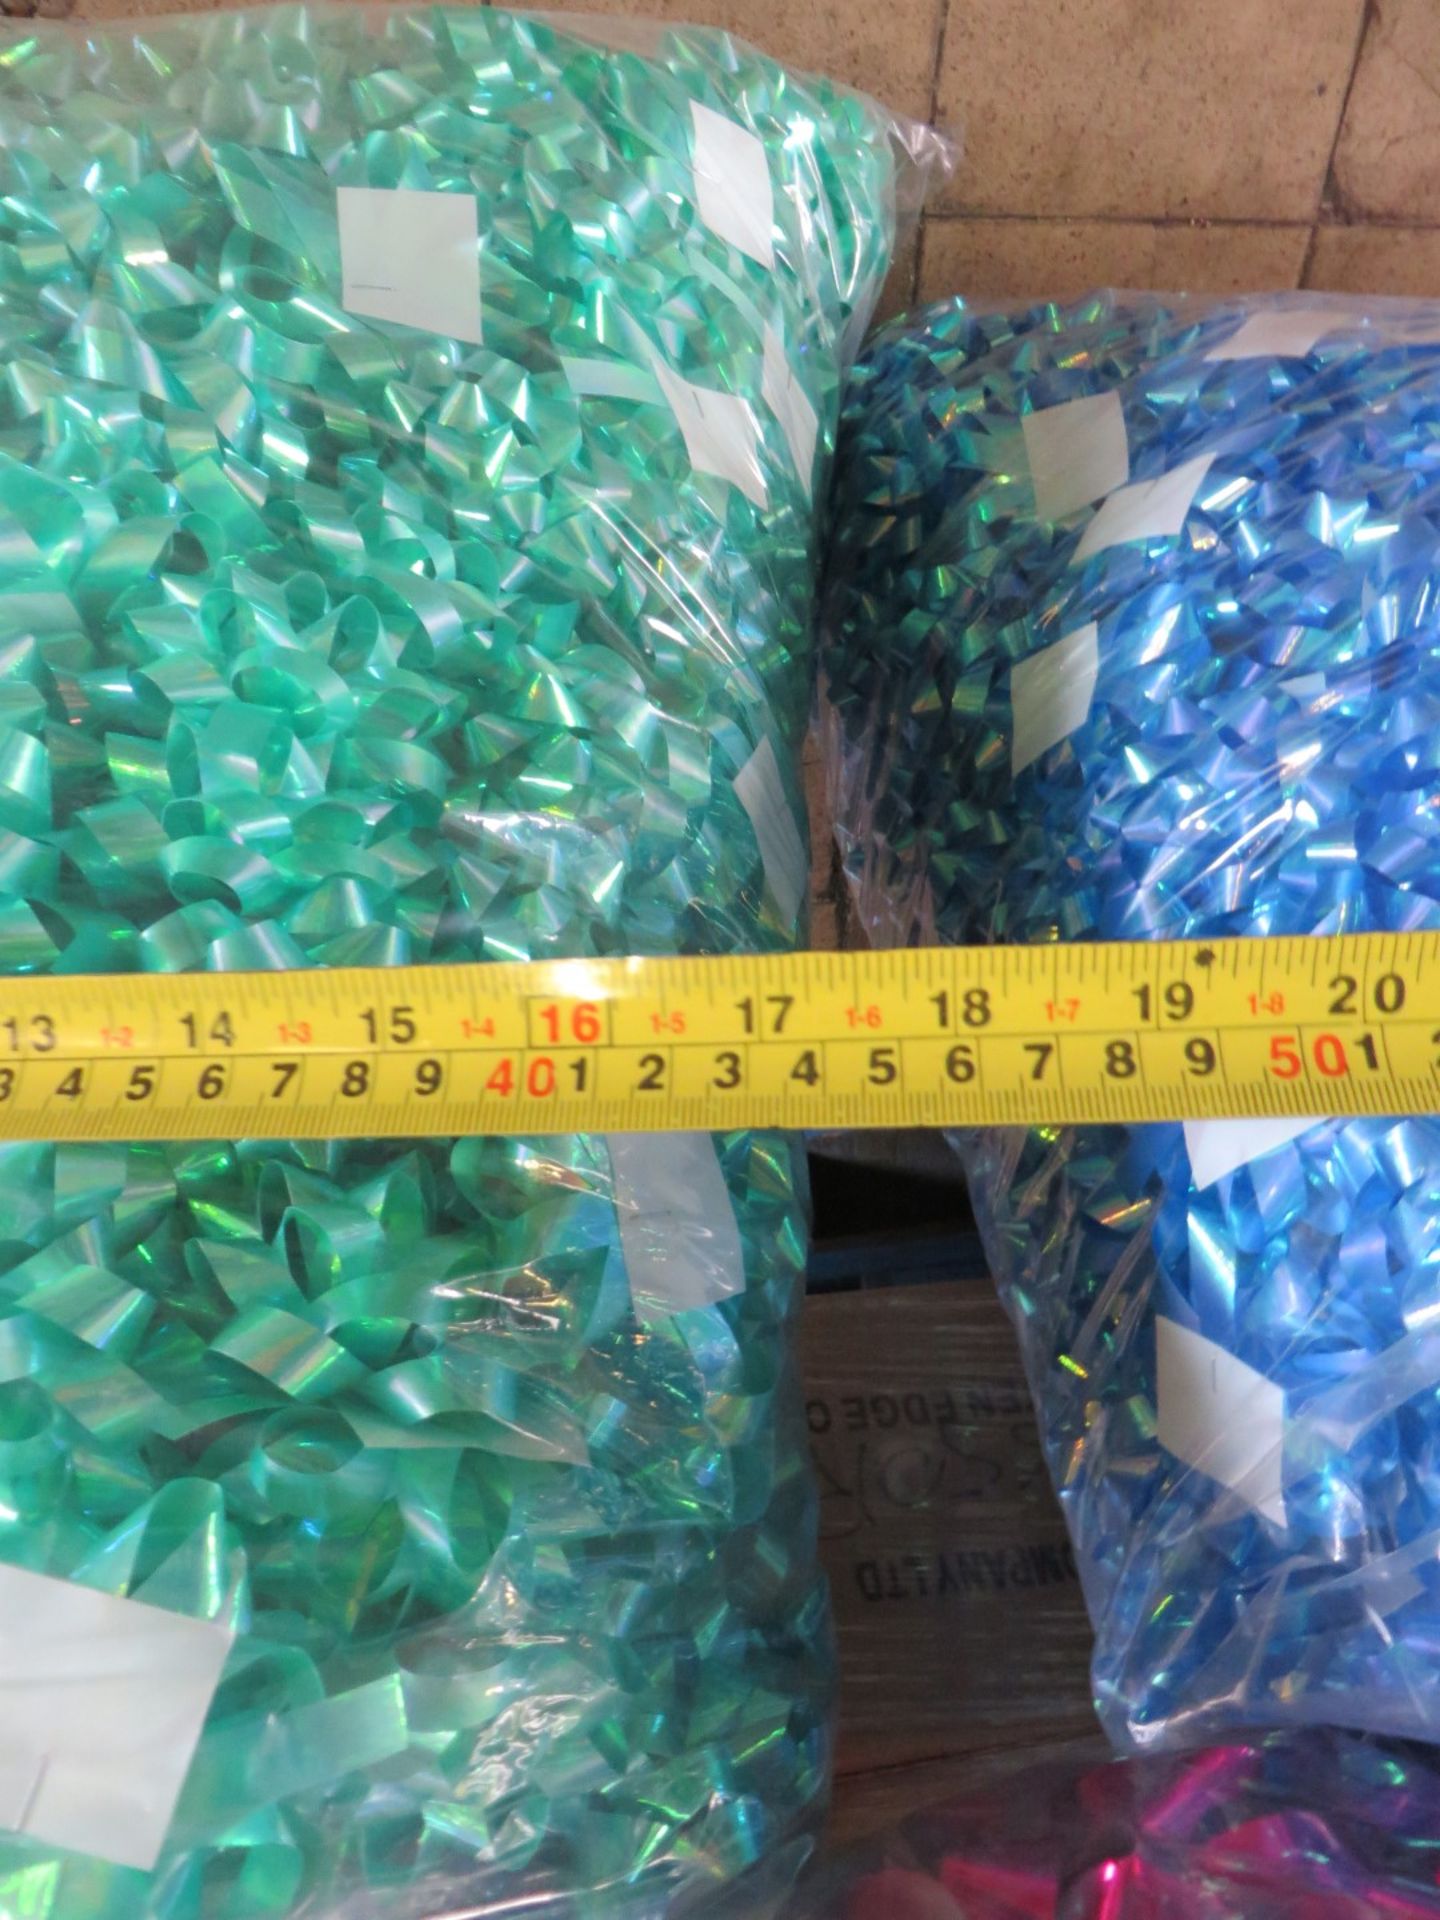 5 x Large Bags of New Self-Adhesive Present Bows - CL185 - Ref: DSY0253 - Location: Stoke-on-Trent S - Image 8 of 9